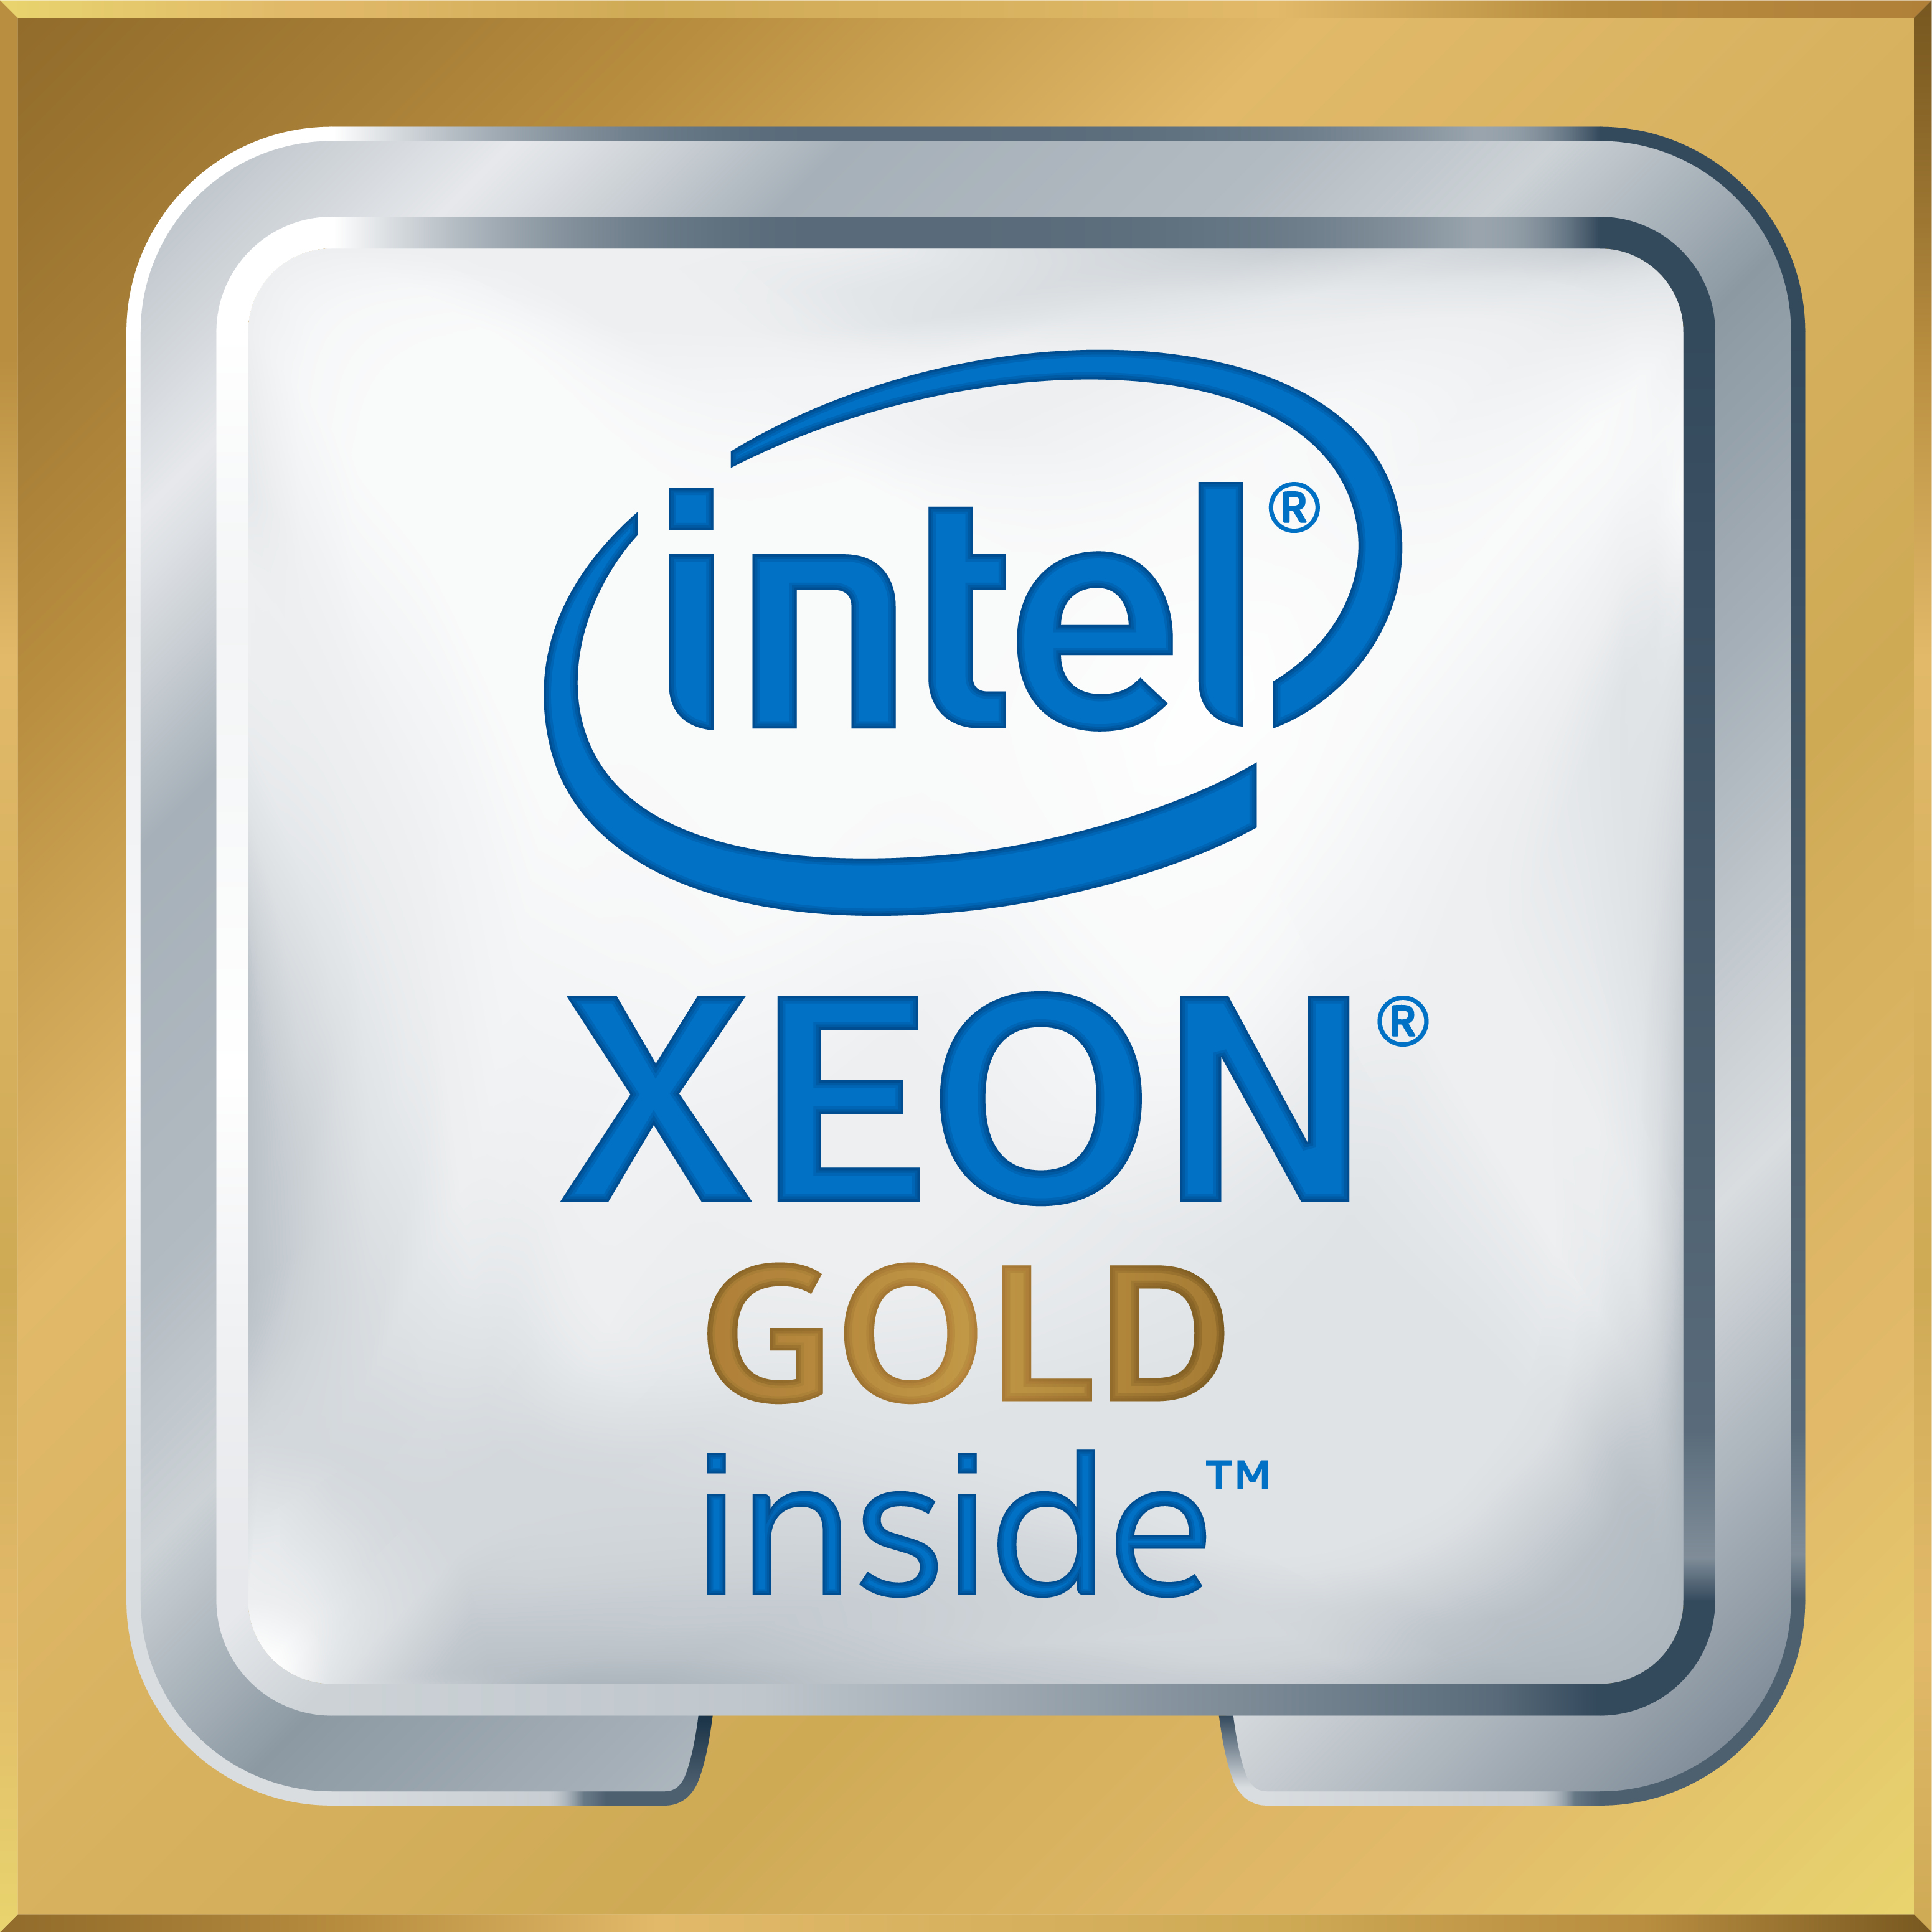 2 x Intel Xeon Gold 5115 - 2.4 GHz - 10-core - 13.75 MB cache - for ThinkSystem SN850